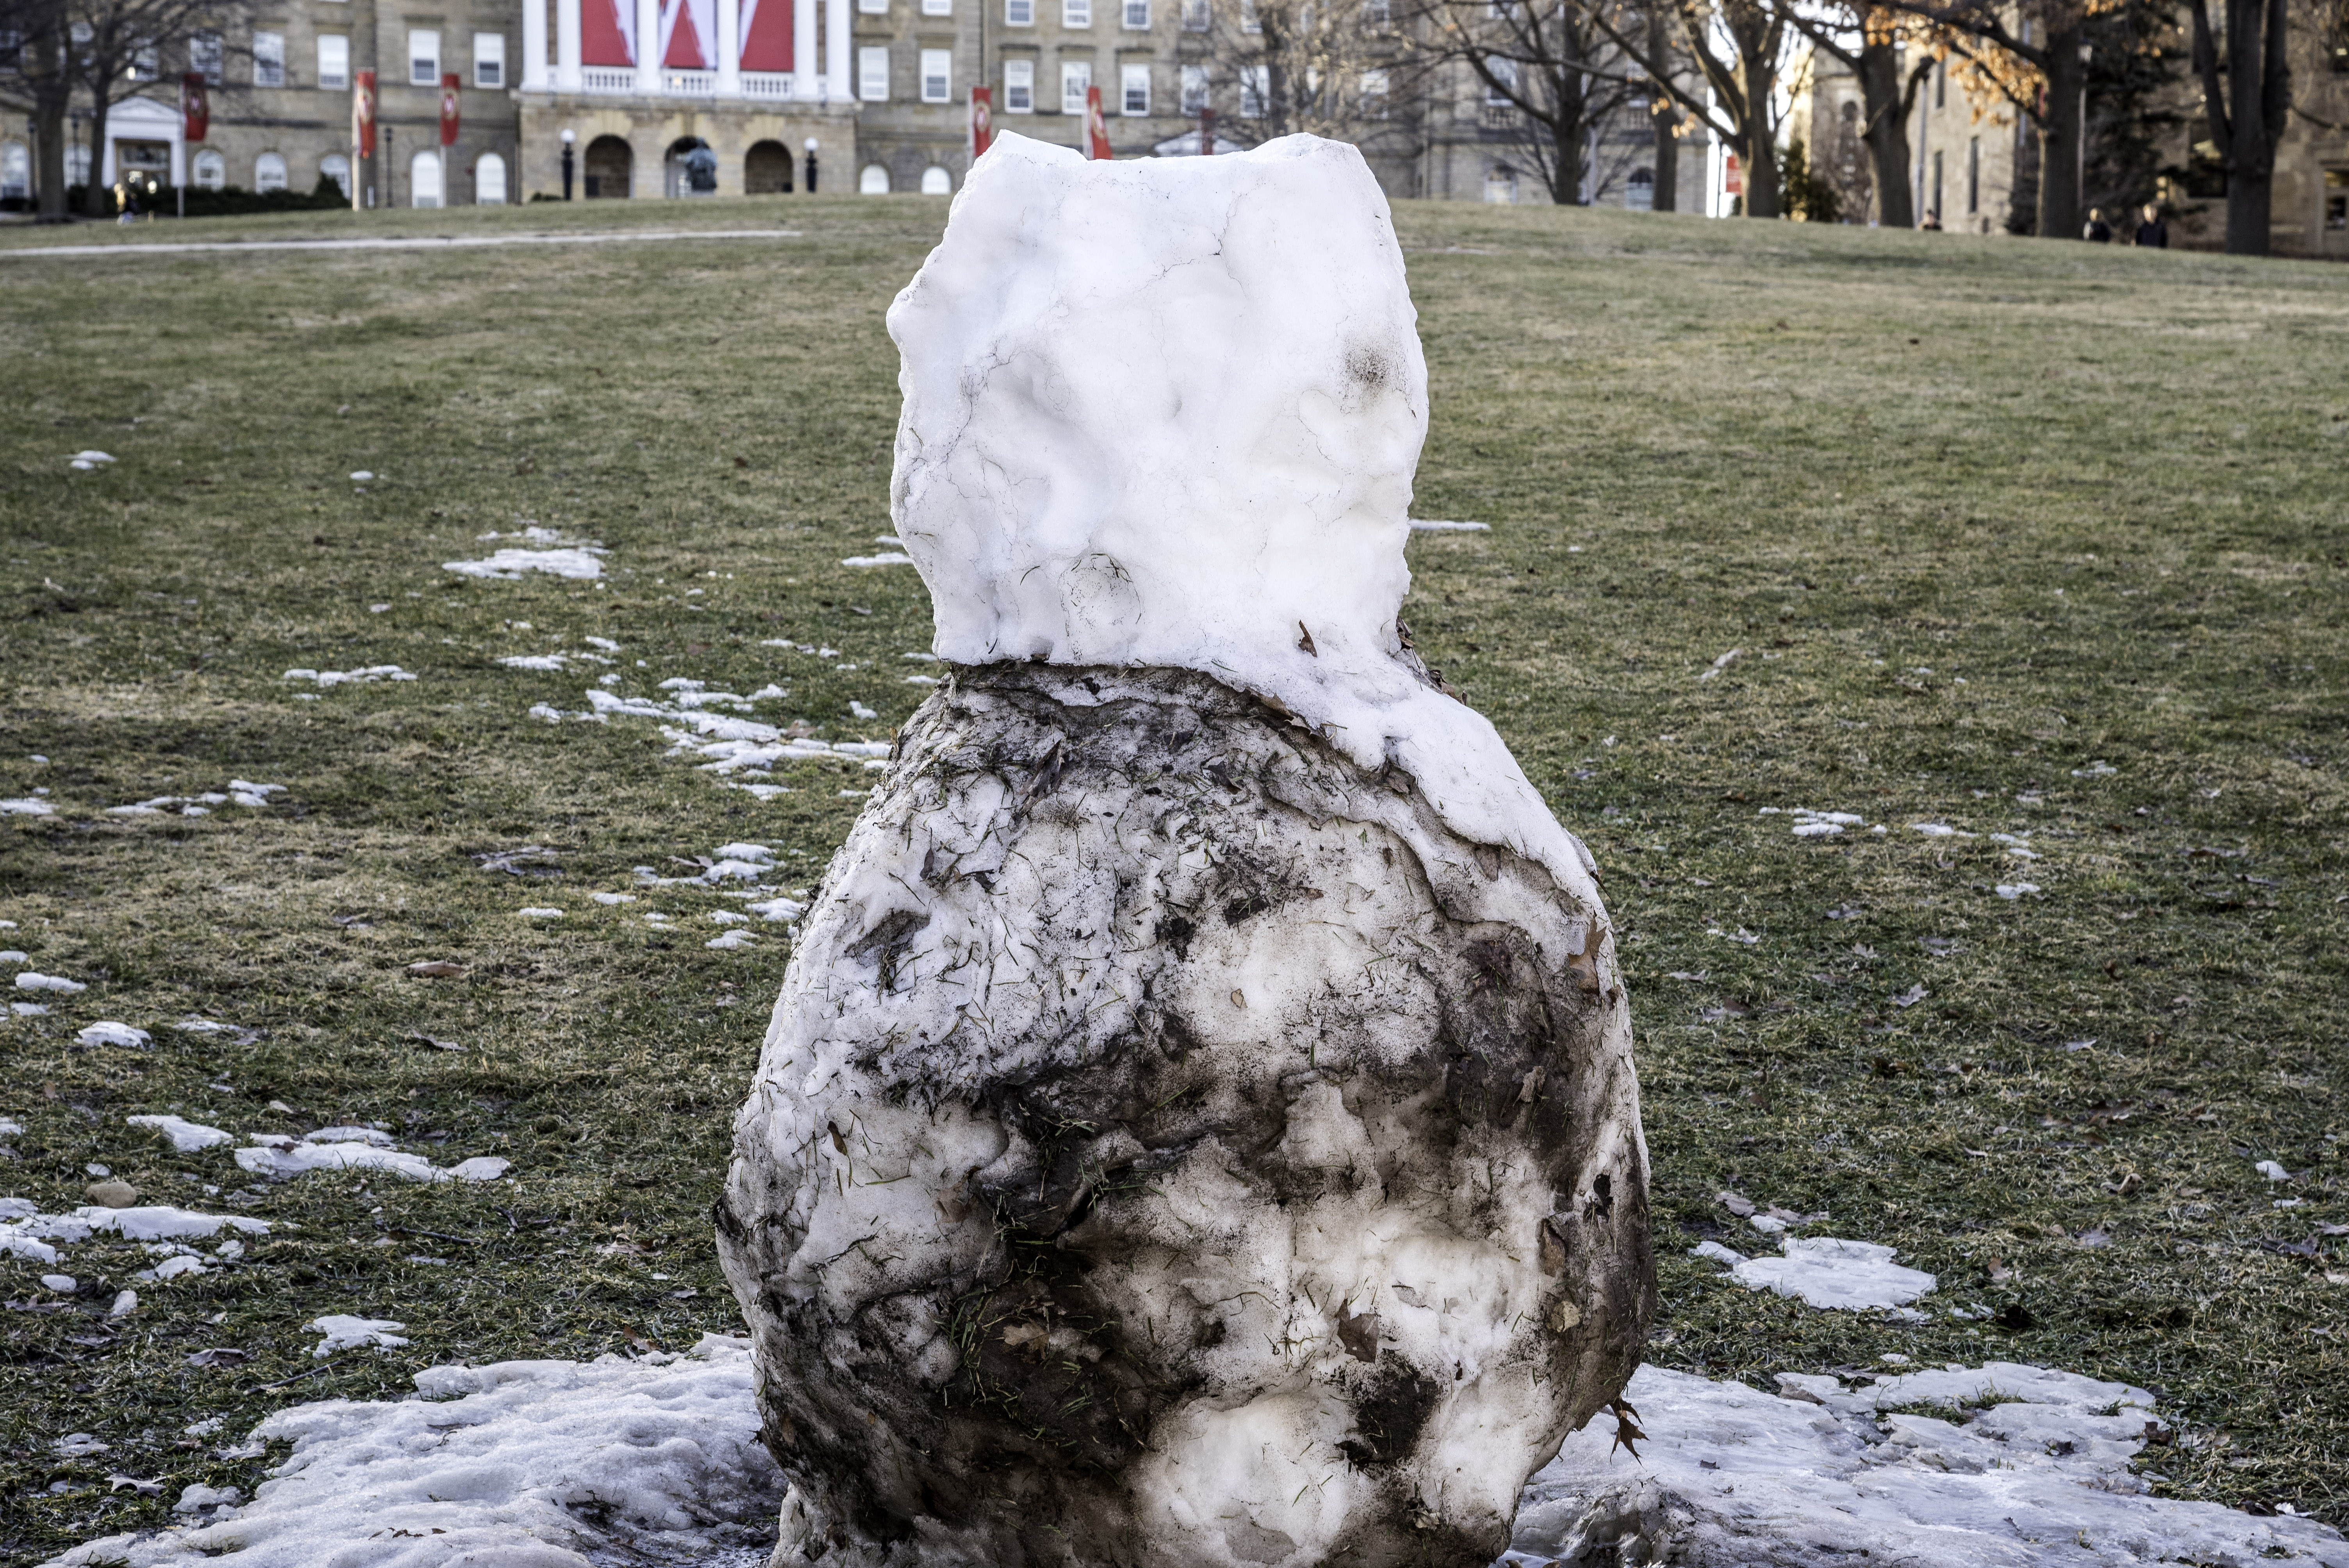 Melting Snowman Picture, Free Photograph